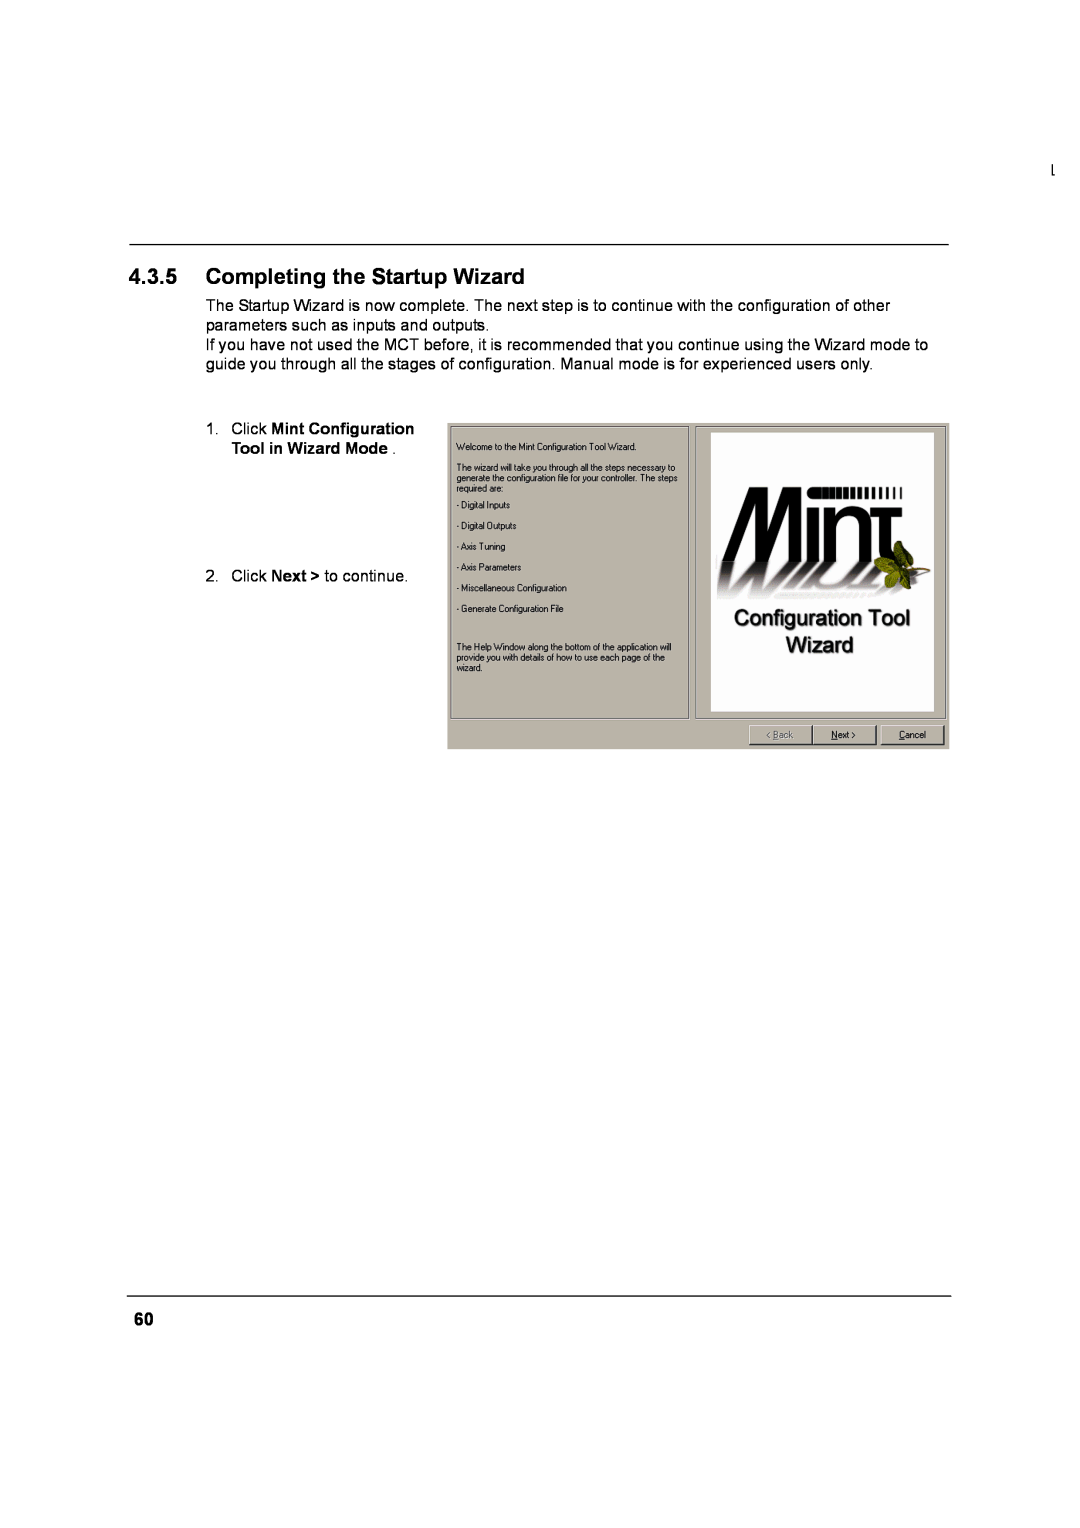 Baldor MN1274 06/2001 installation manual Completing the Startup Wizard, Click Mint Configuration Tool in Wizard Mode 